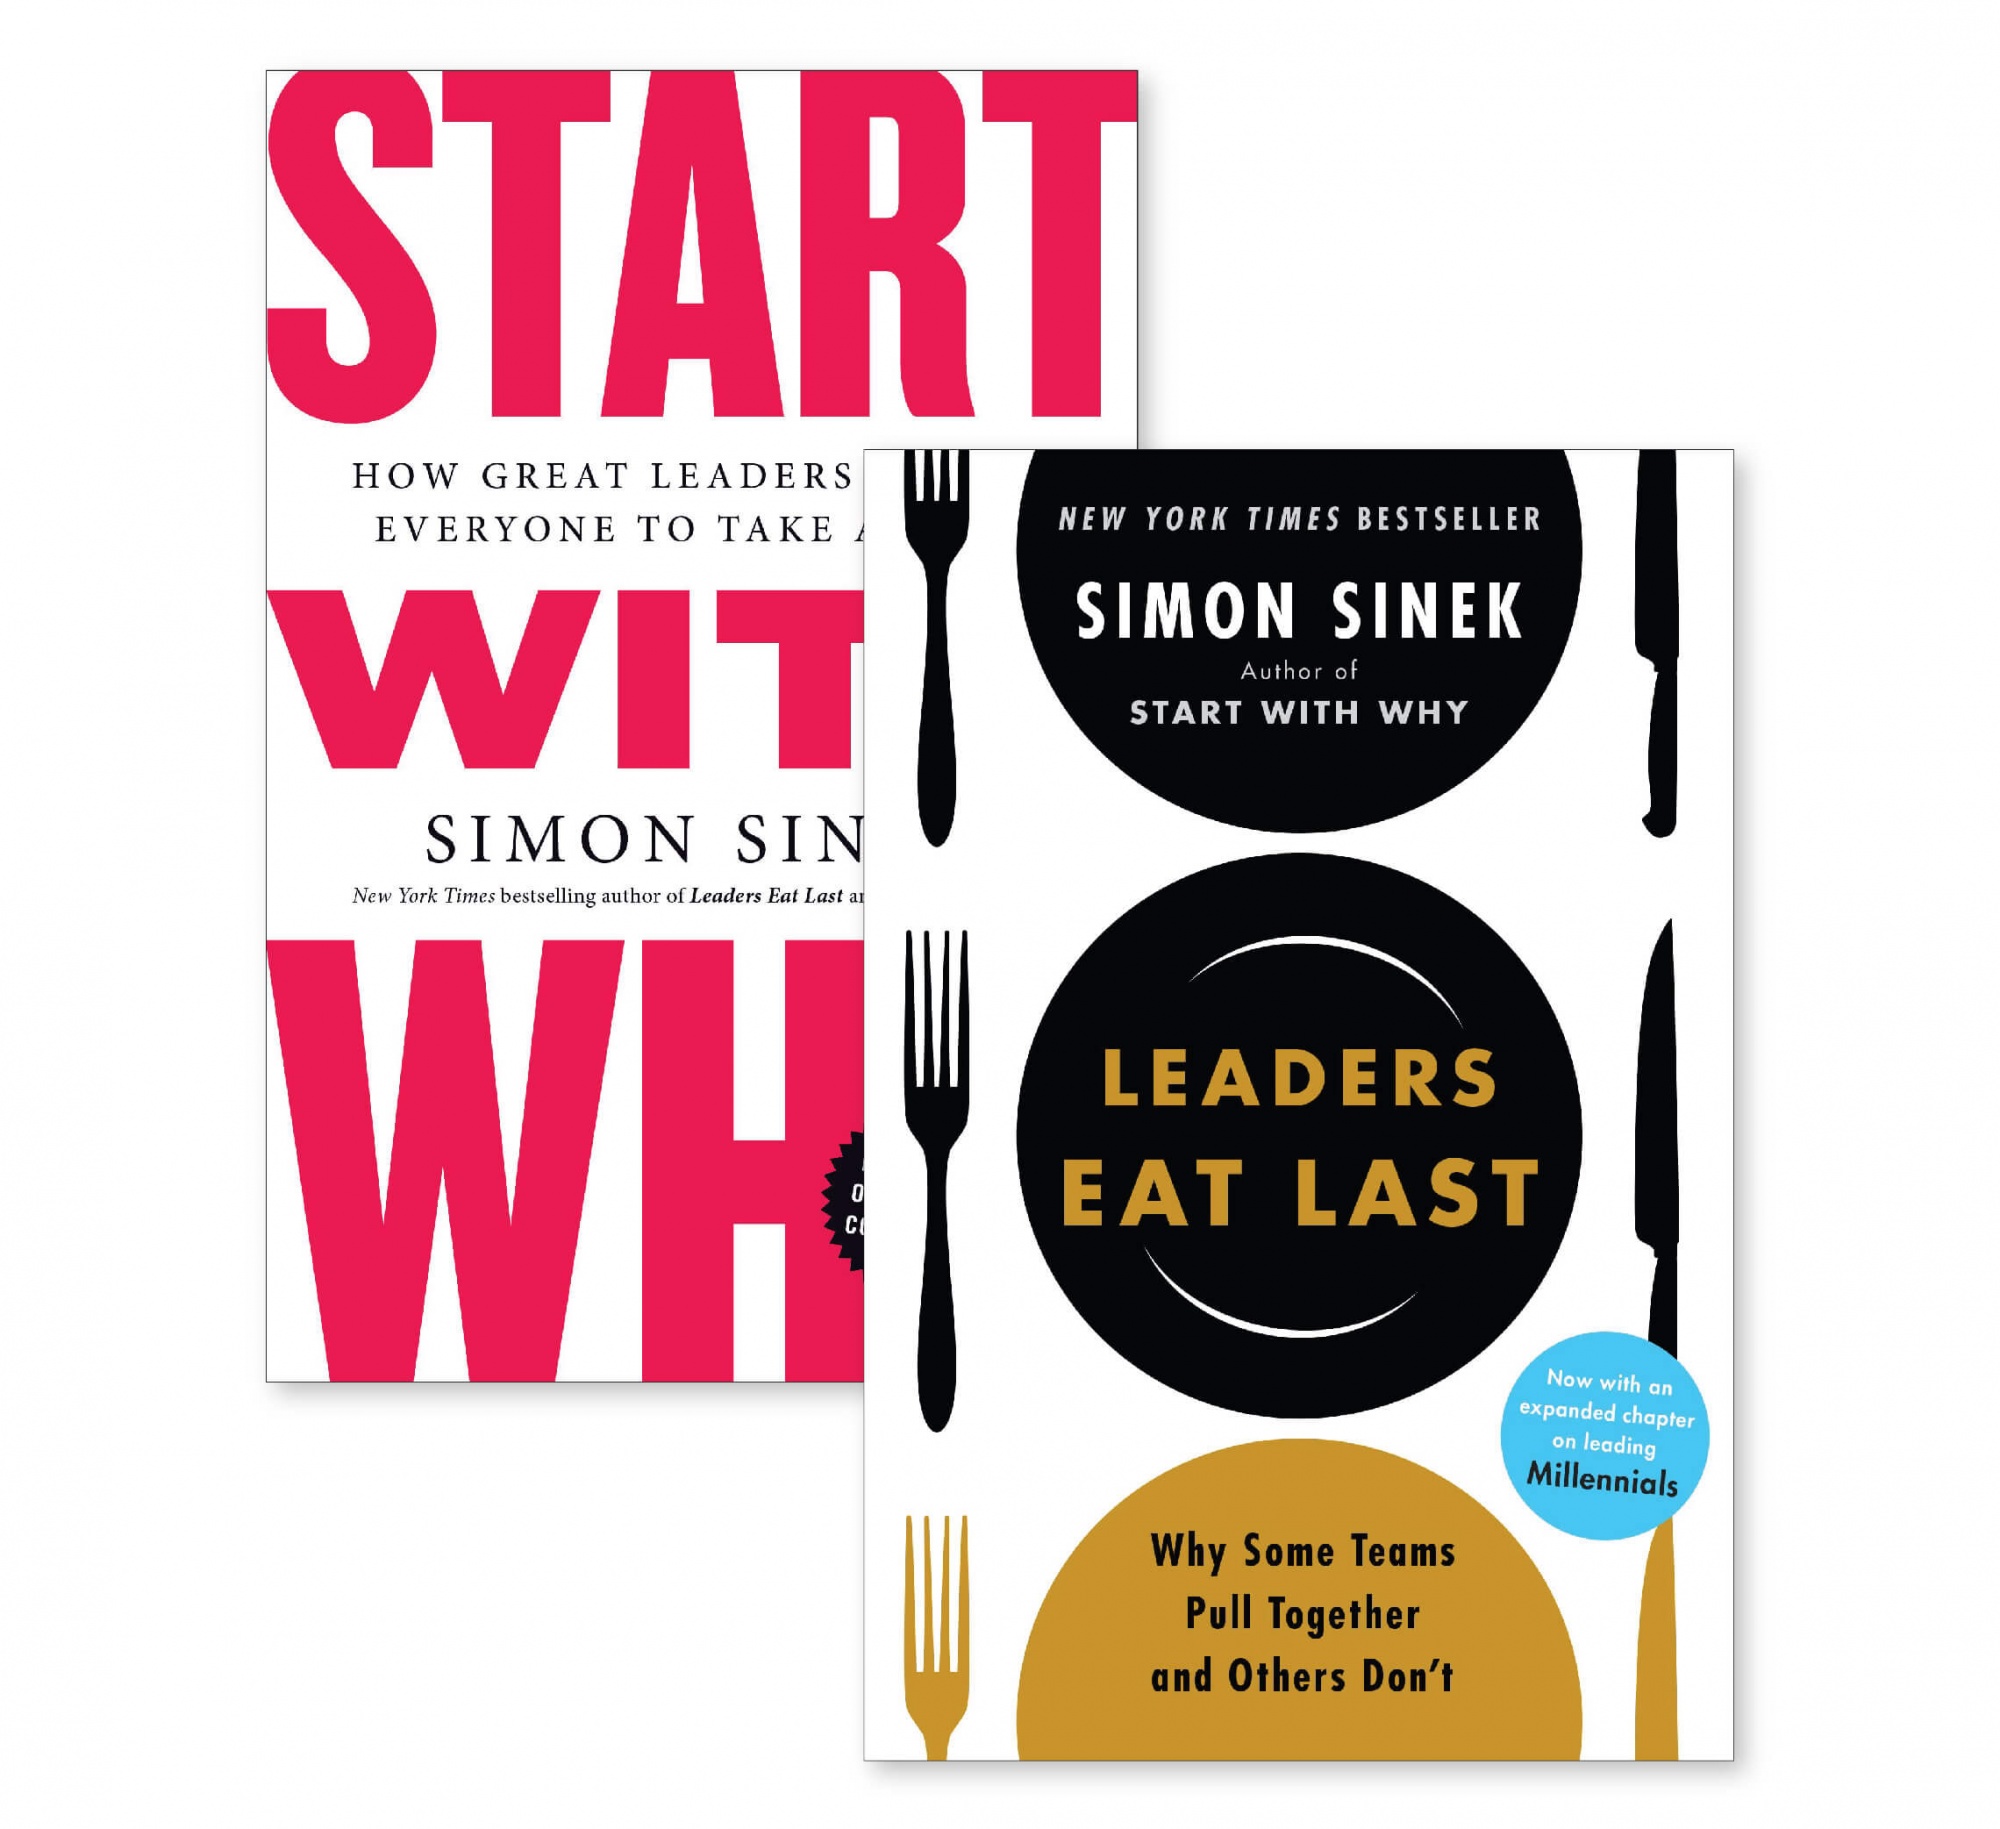 Start With Why and Leaders Eat Last by Simon Sinek